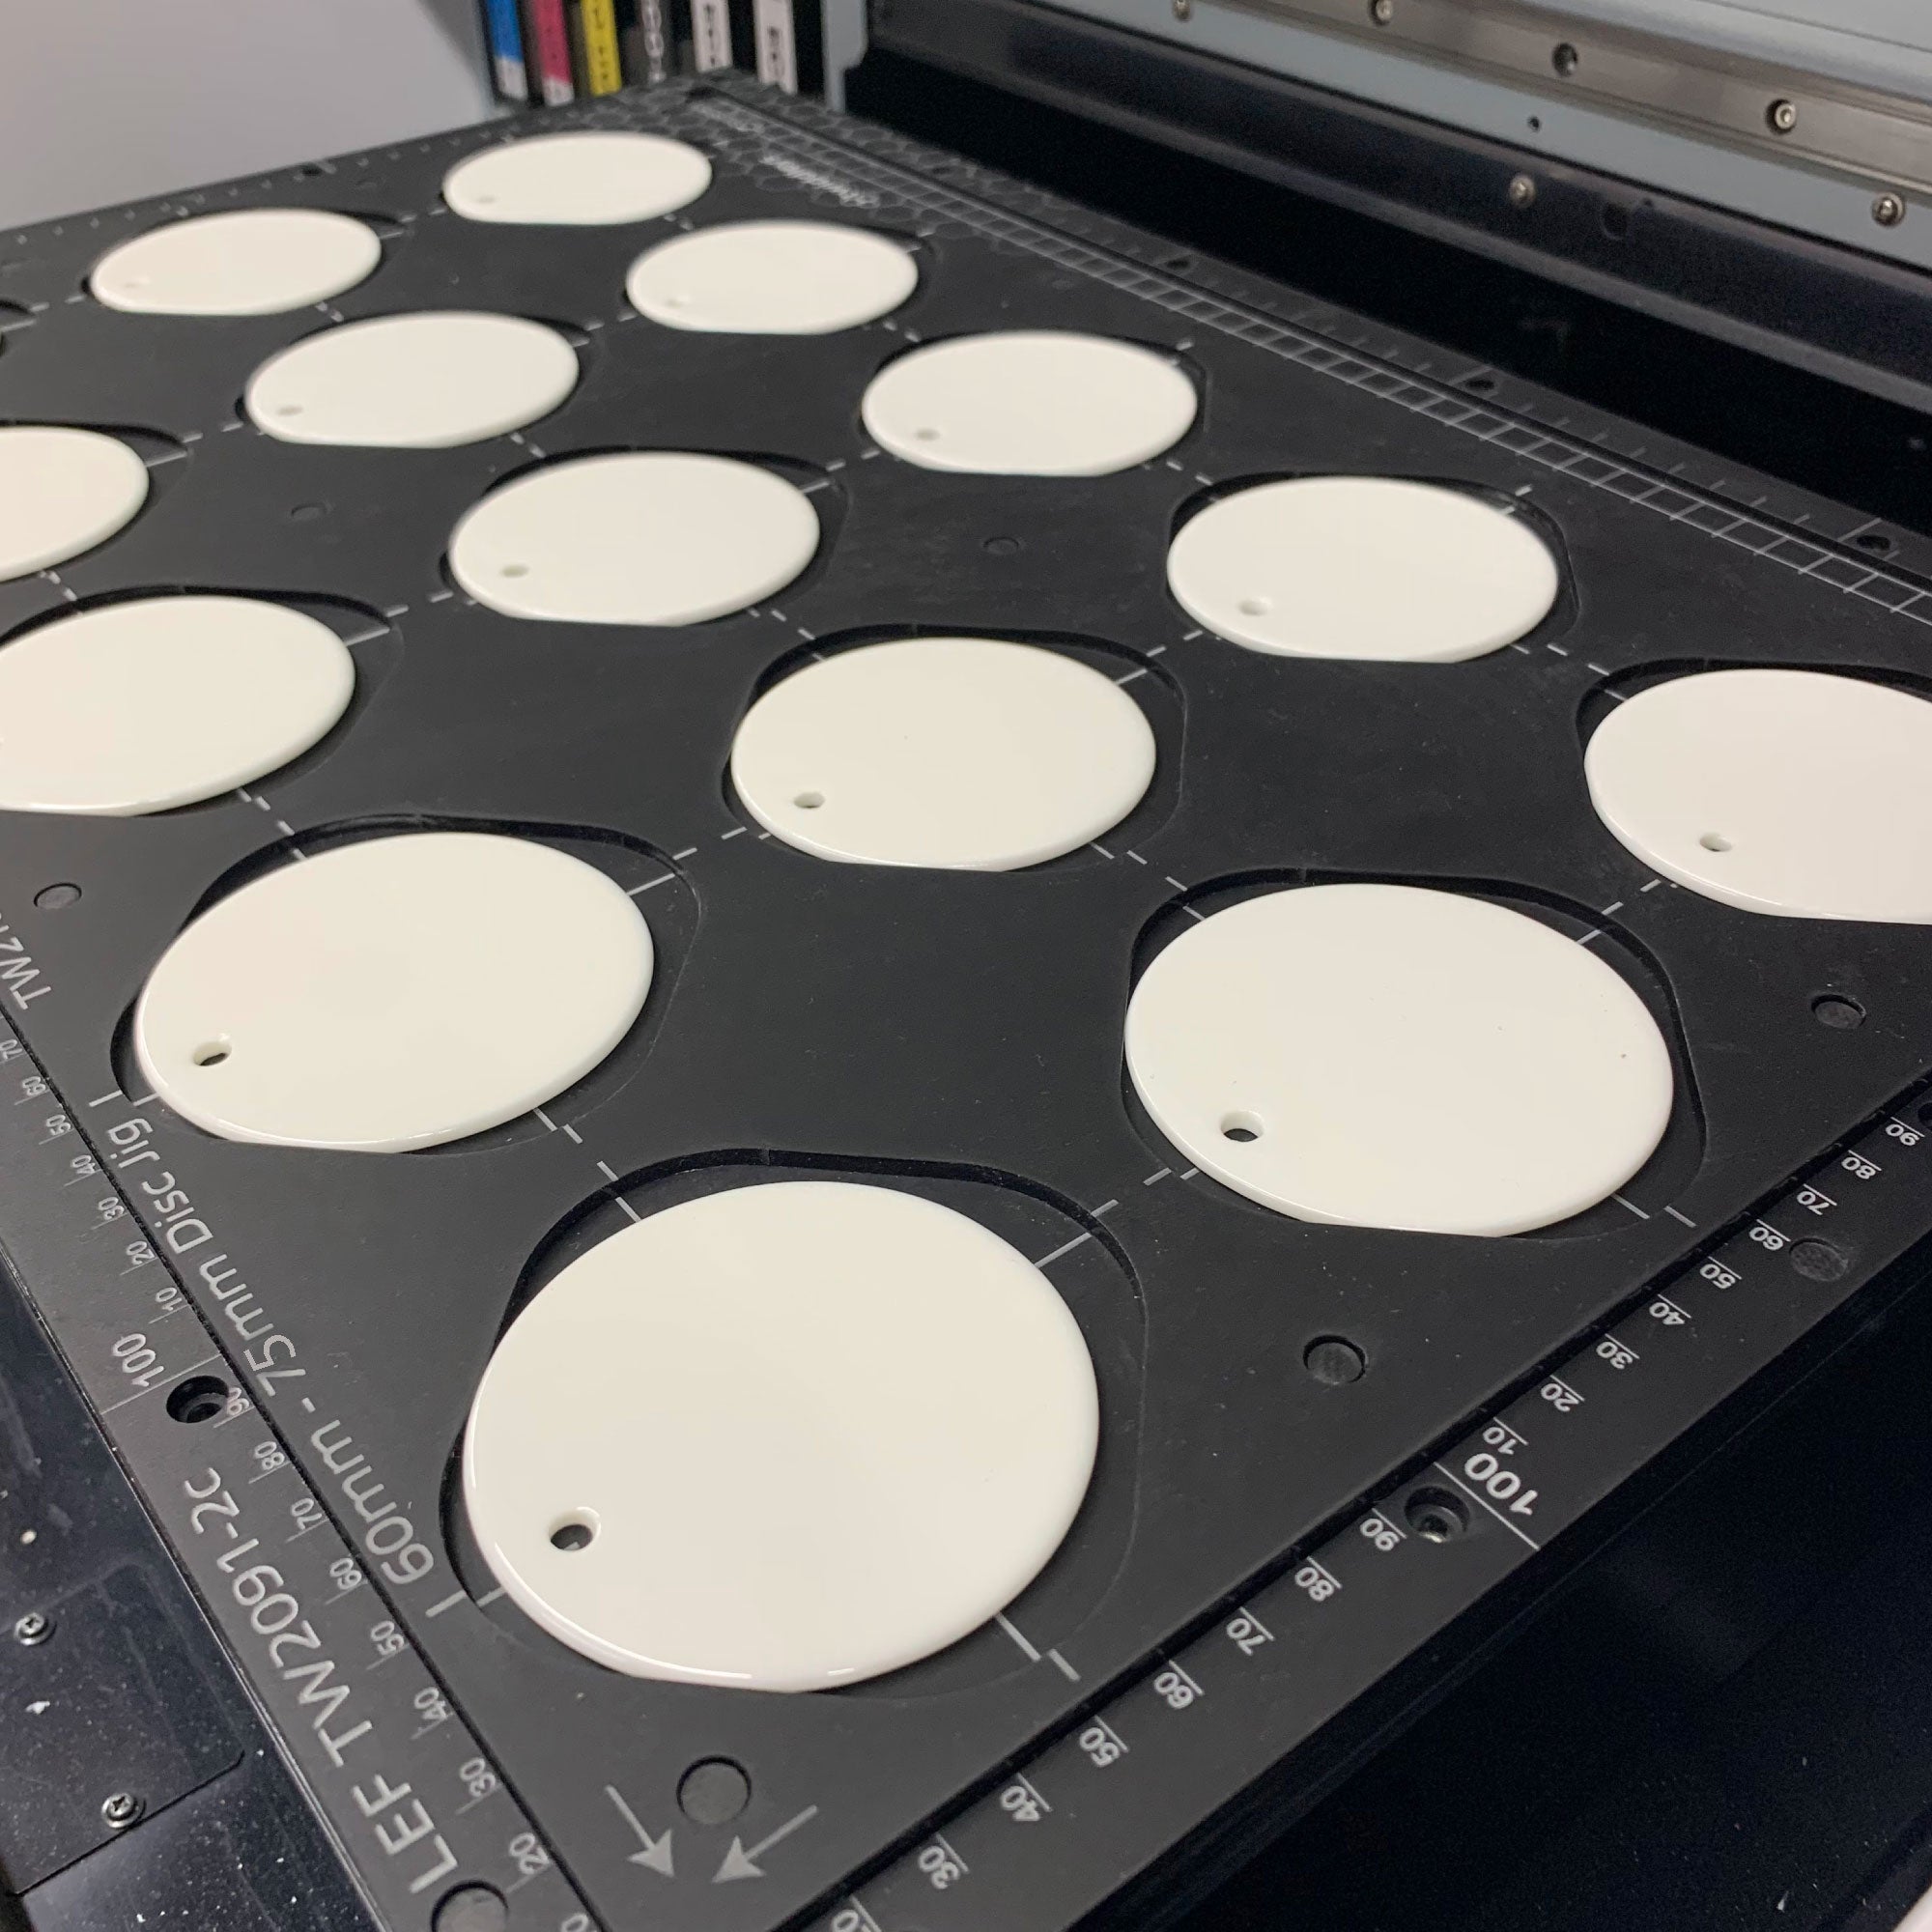 Ceramic Christmas Bauble Printing Jig for Roland MO-240 Flatbed Printer Series: 60mm - 77mm Circular Discs (TBA Spaces)